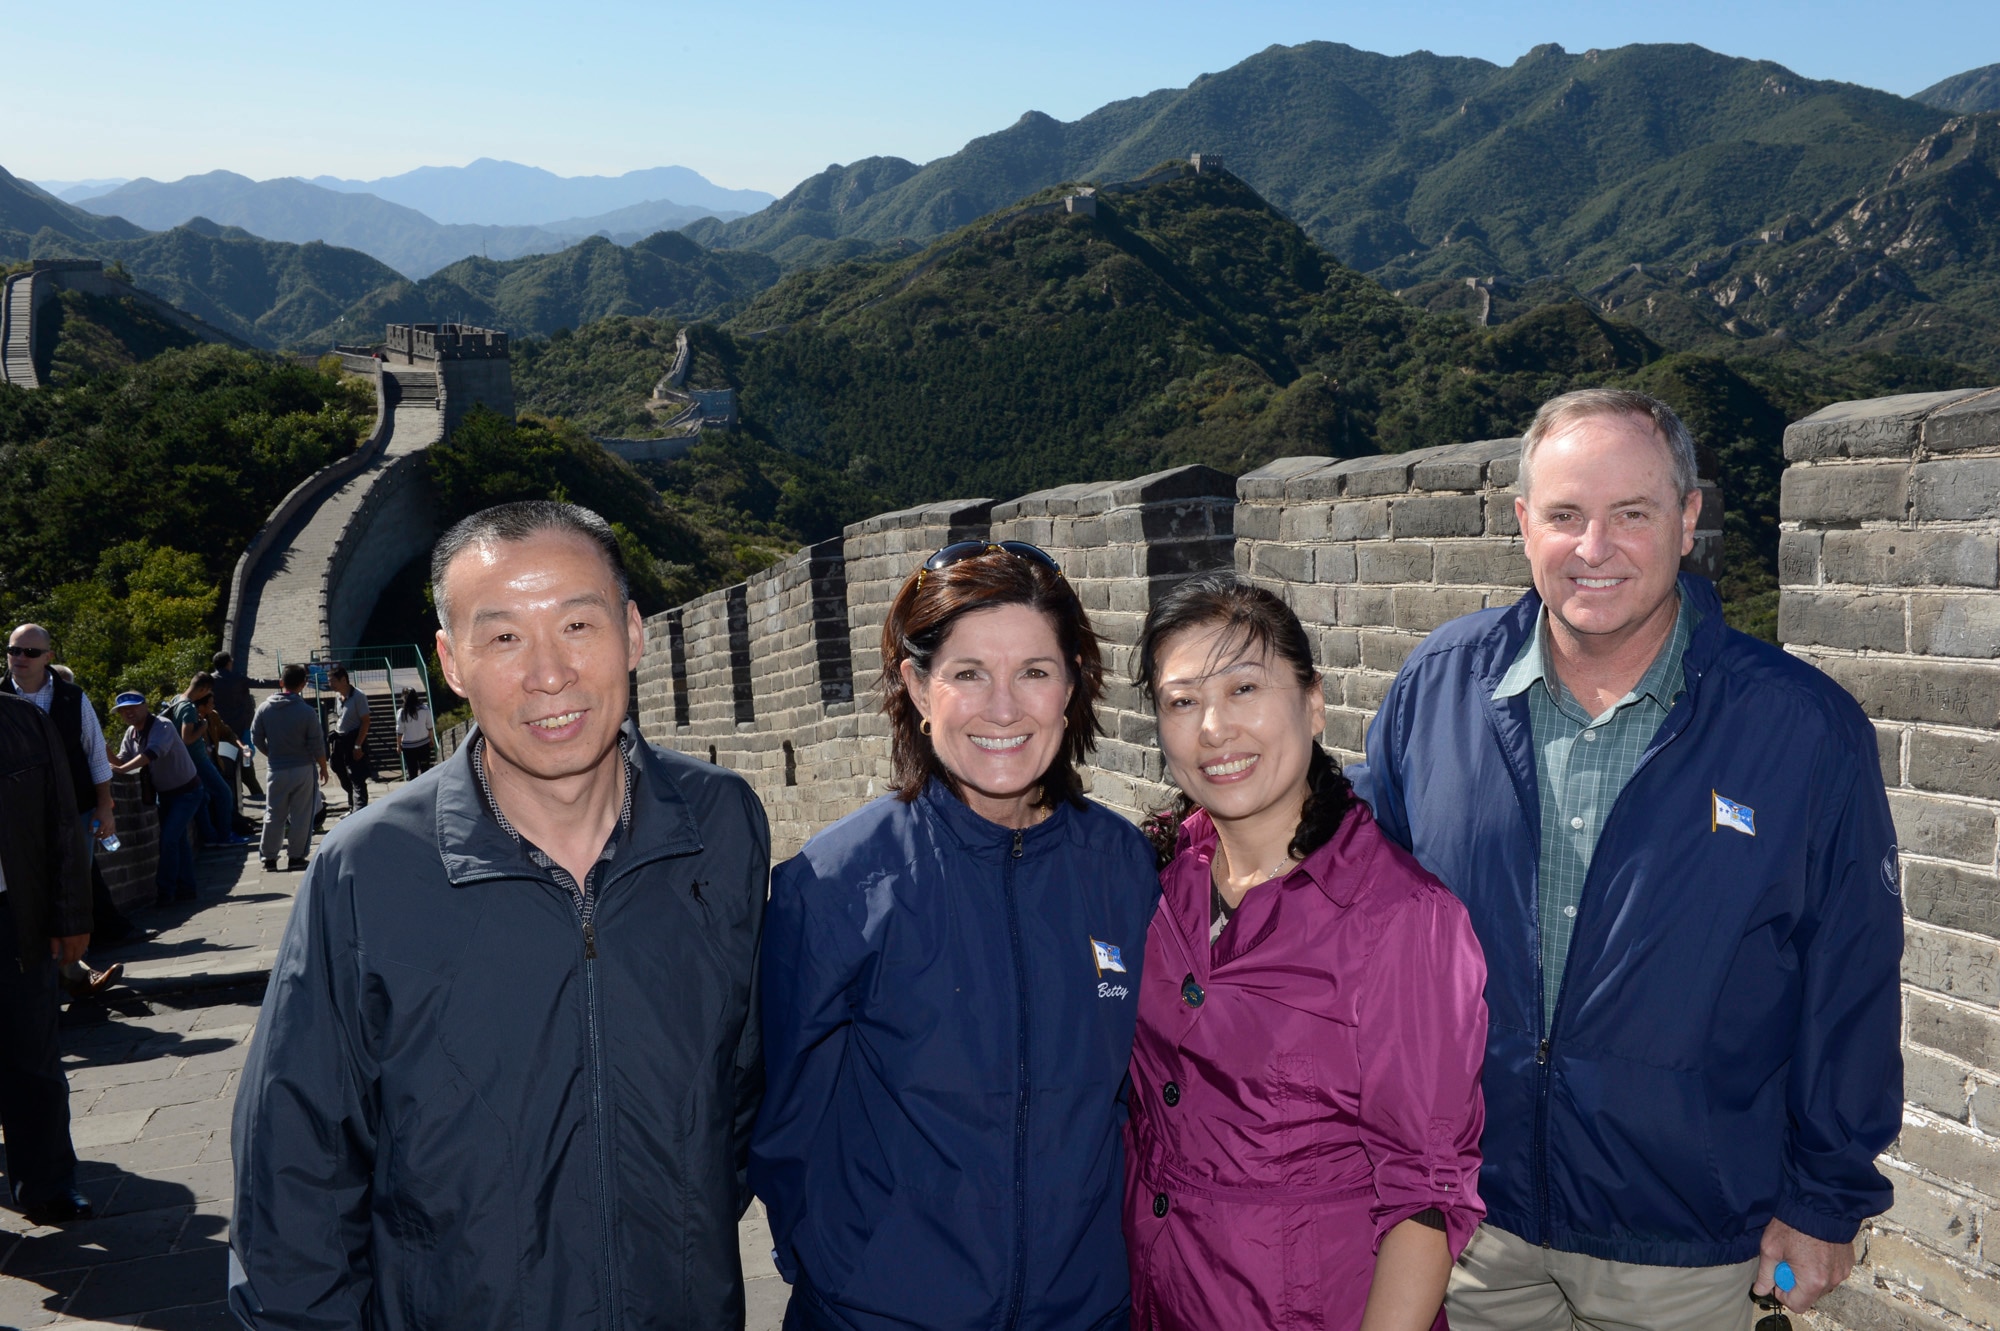 Air Force Chief of Staff Gen. Mark A. Welsh III, his wife, Betty, People's Liberation Army Air Force Deputy Chief of Staff Maj. Gen. Li Chunchao, and his wife, Han Yan, stand at the Great Wall in China, as part of a cultural tour Sept. 24, 2013.  Welsh, along with Gen. Herbert "Hawk" Carlisle and Chief Master Sgt. of the Air Force James A. Cody will visit with various military leaders as part of a weeklong trip. (U.S. Air Force photo/Scott M. Ash)